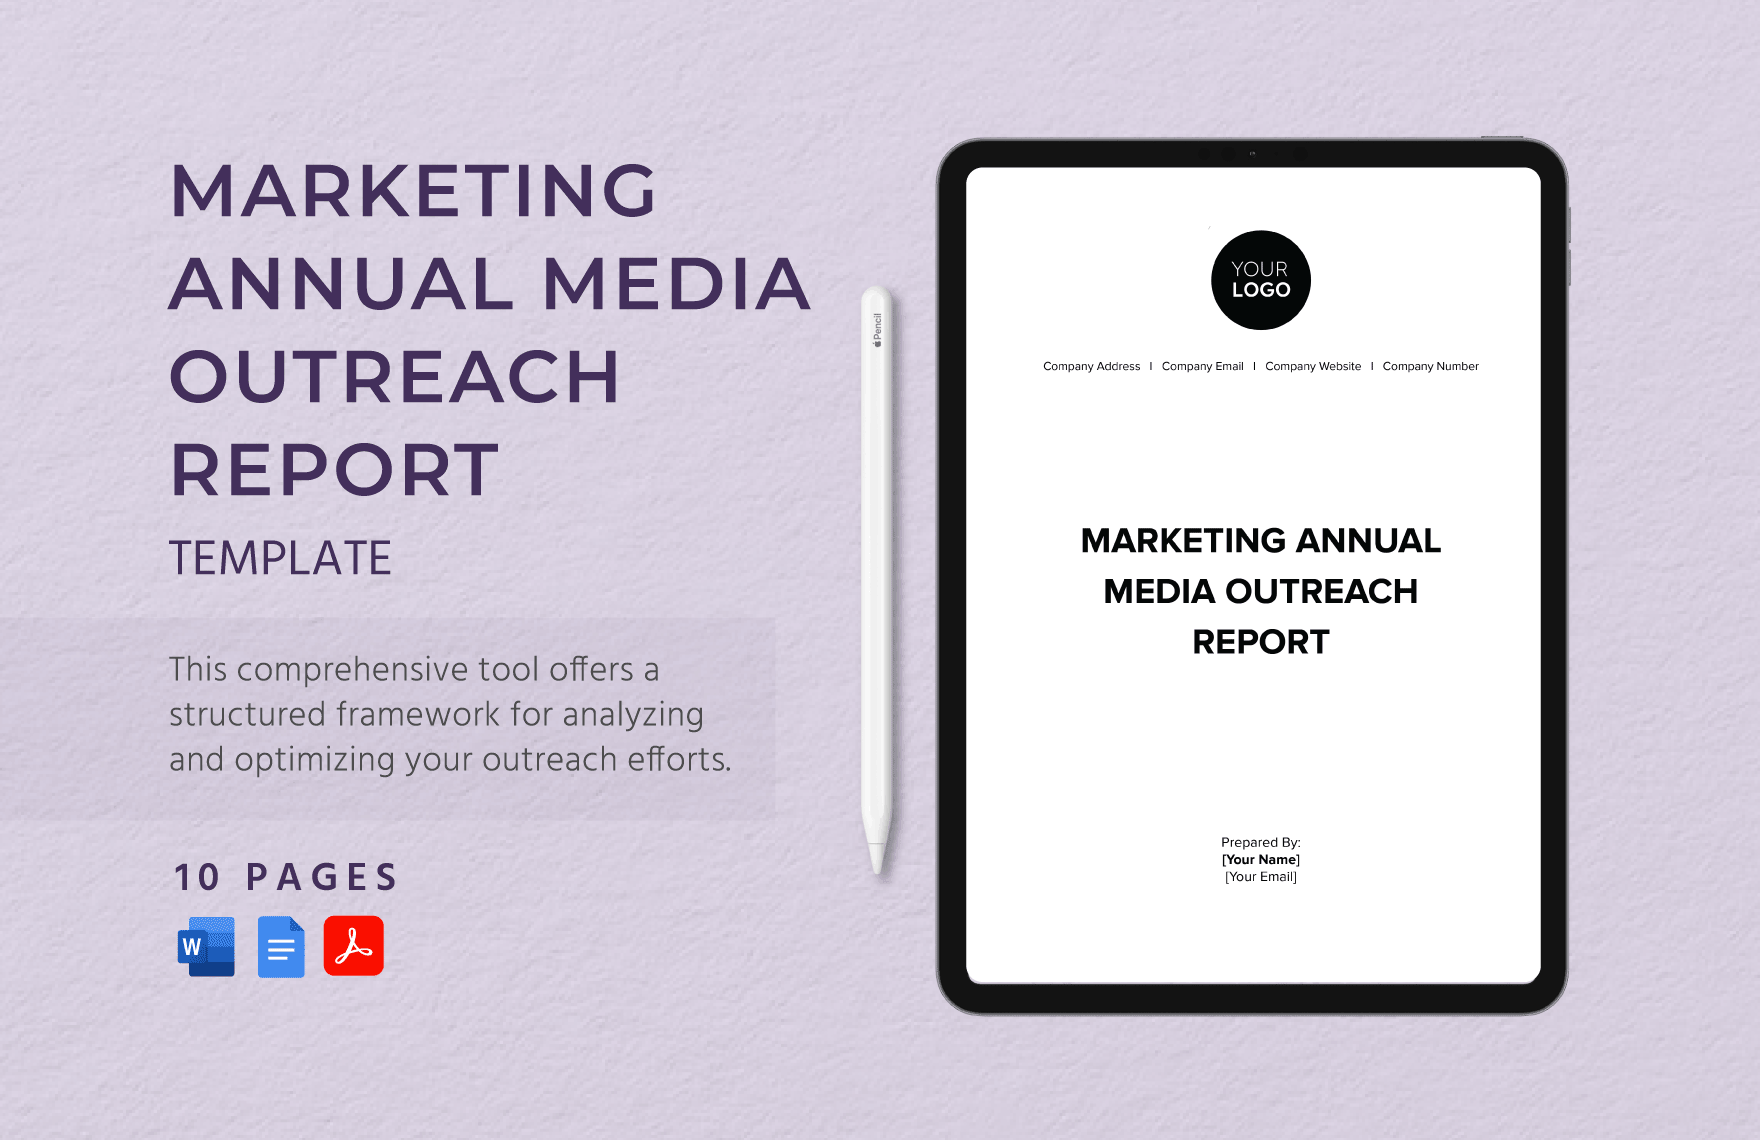 Marketing Annual Media Outreach Report Template